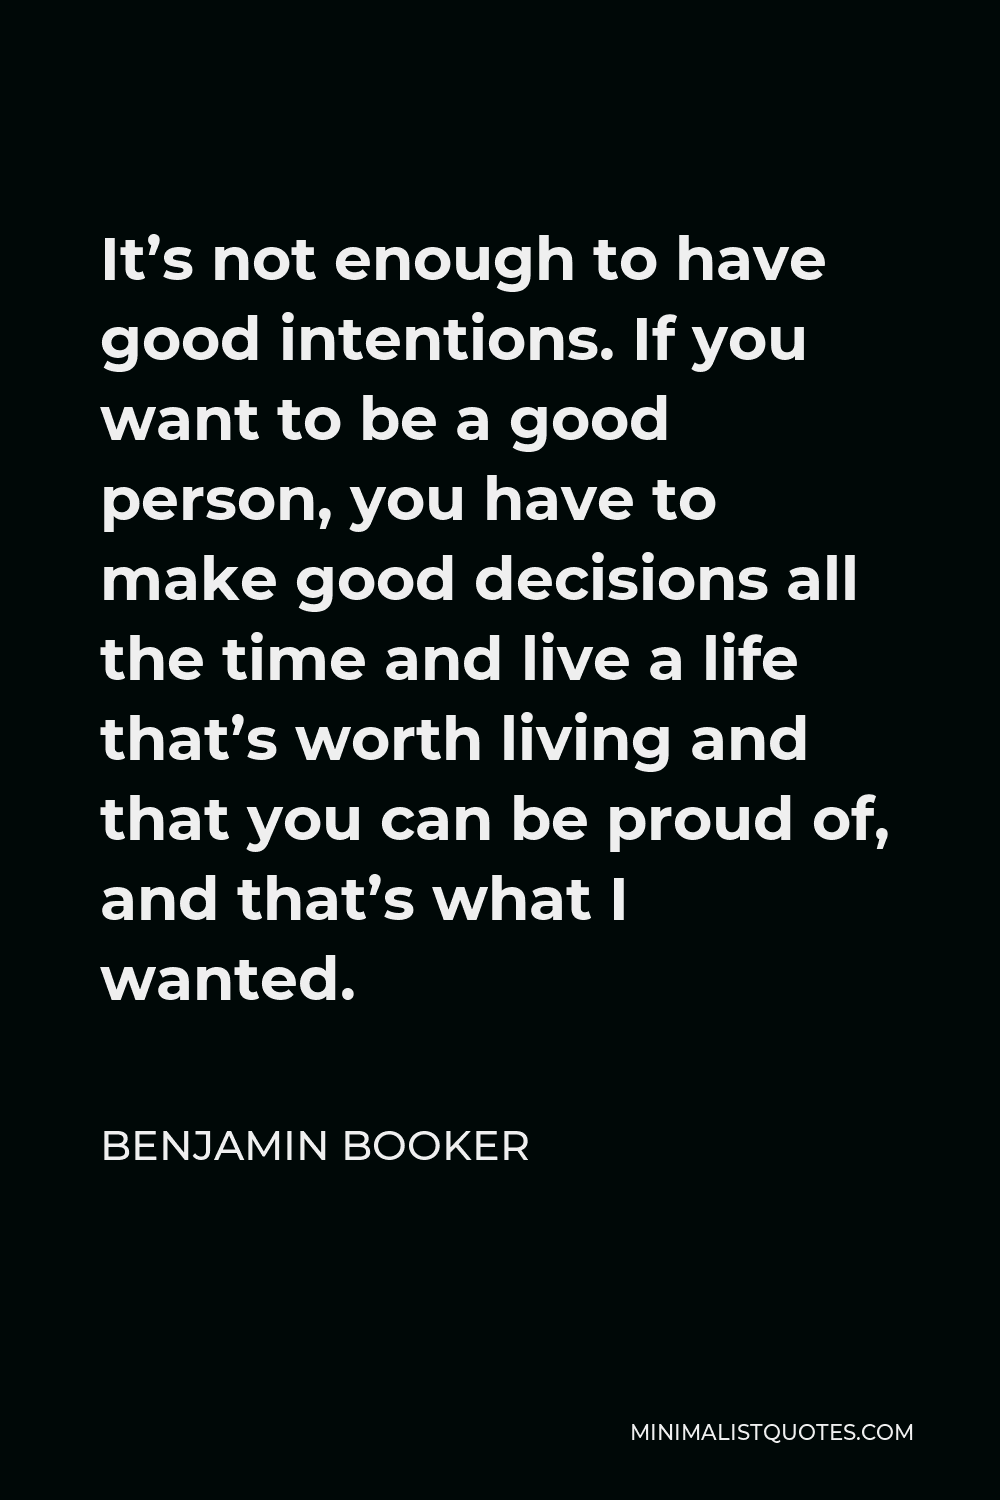 Benjamin Booker Quote - It’s not enough to have good intentions. If you want to be a good person, you have to make good decisions all the time and live a life that’s worth living and that you can be proud of, and that’s what I wanted.